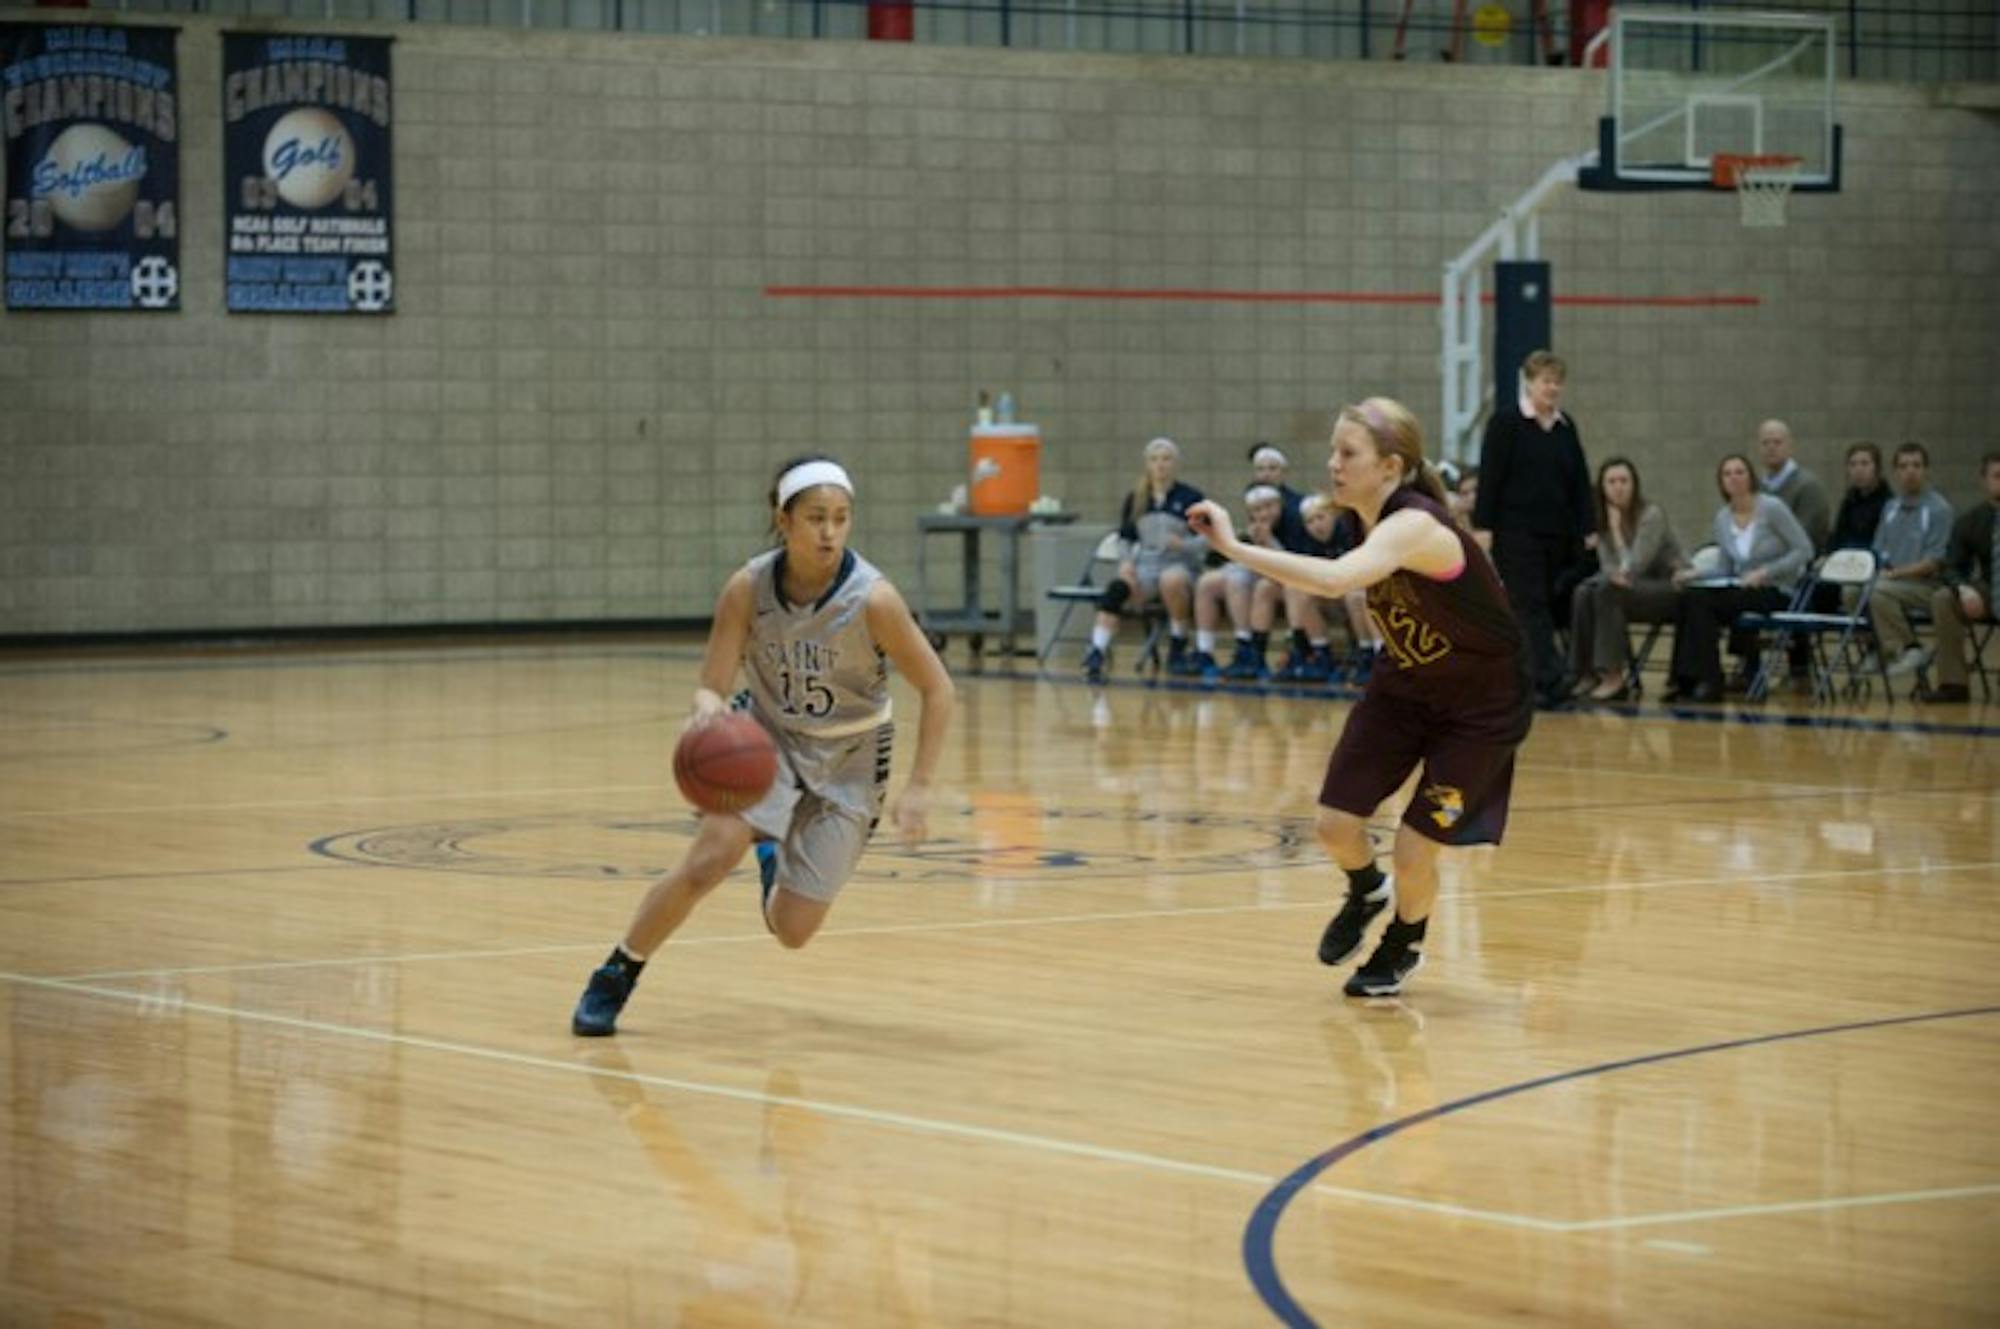 Saint Mary's freshman guard Heather Pesigan drives during the Belles' 95-68 loss to Calvin on Jan. 15.